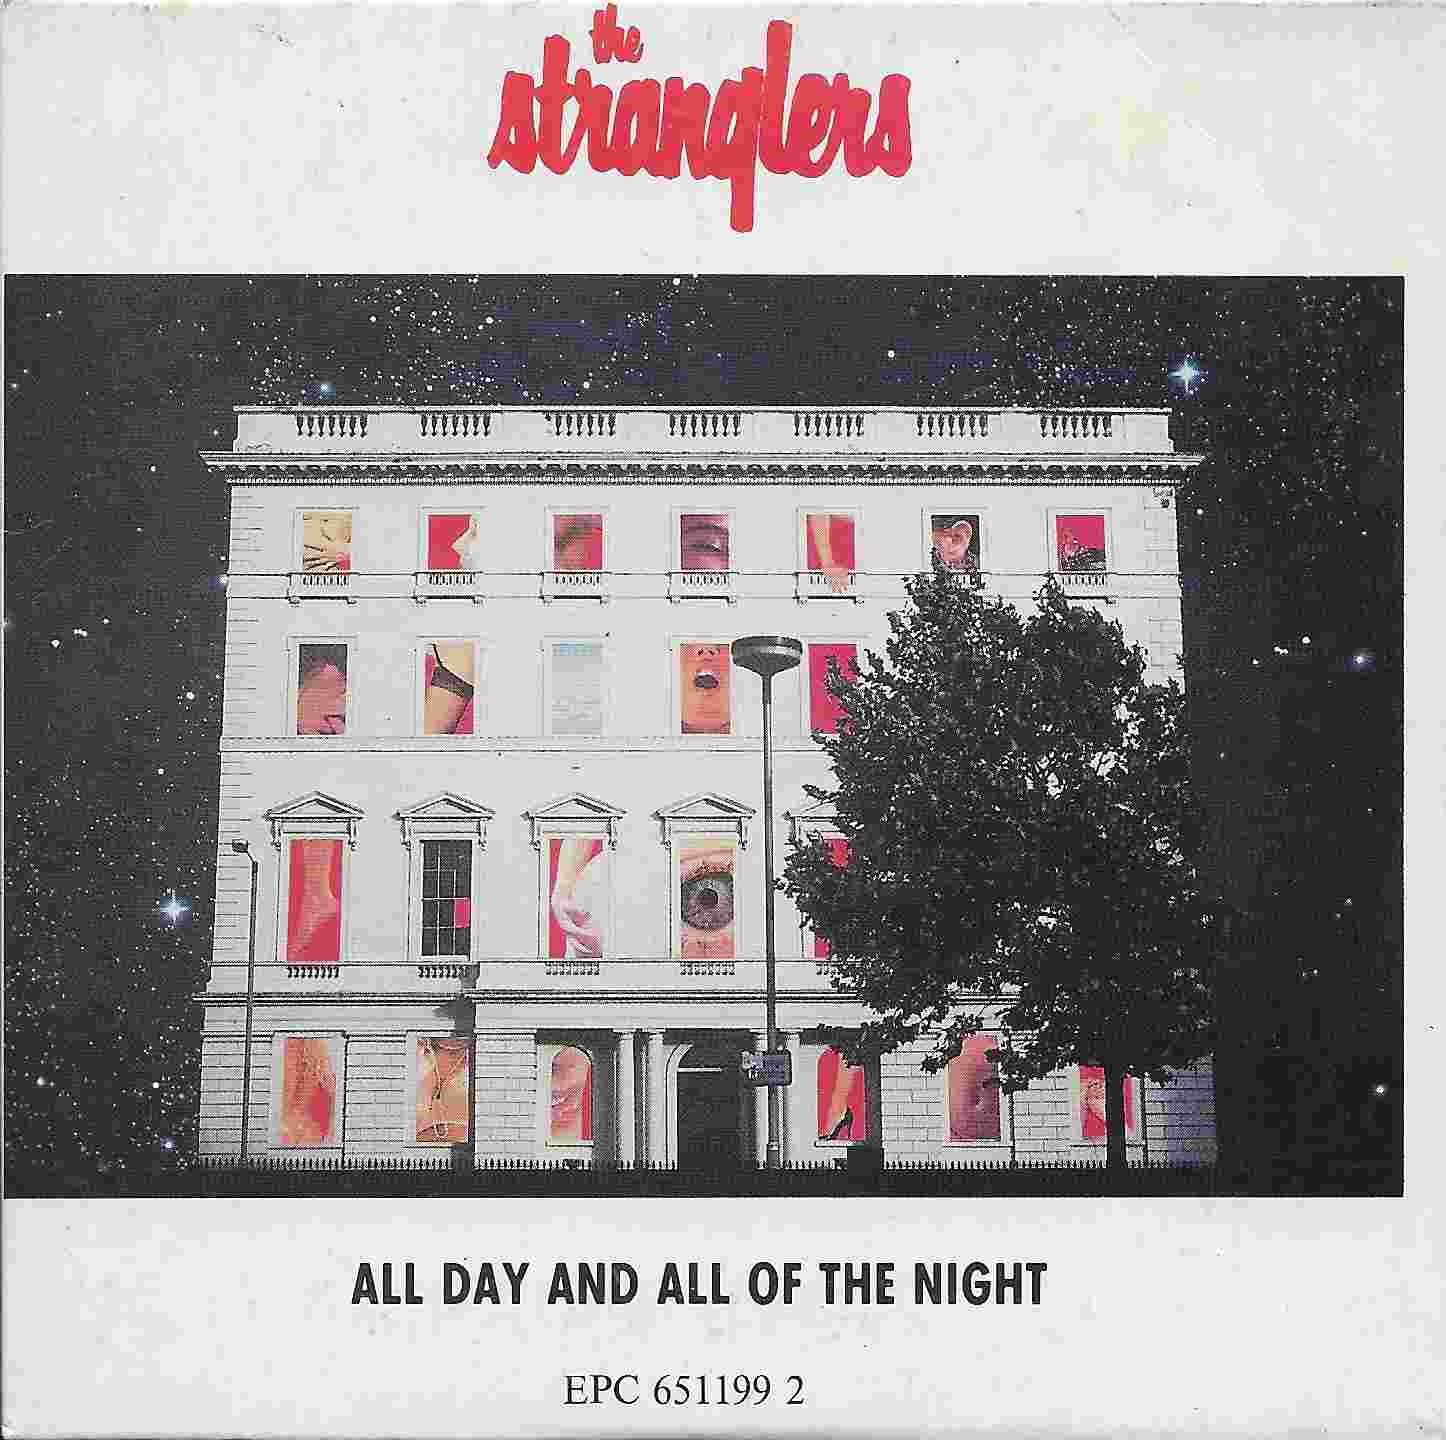 Picture of CD VICE 1 All day and all of the night by artist The Stranglers from The Stranglers cdsingles